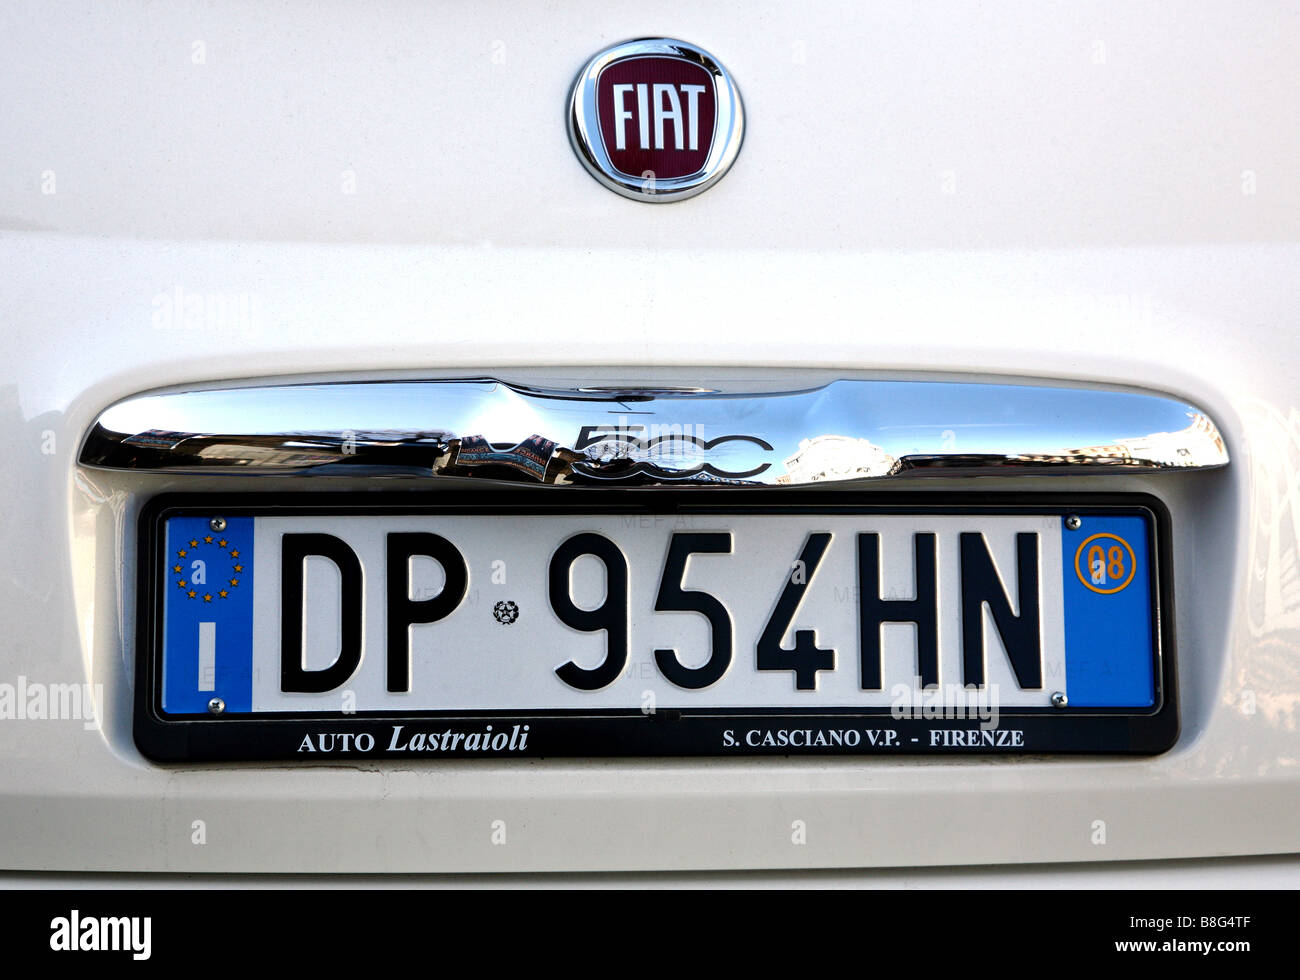 Italian number plate on Fiat 500 car Stock Photo - Alamy